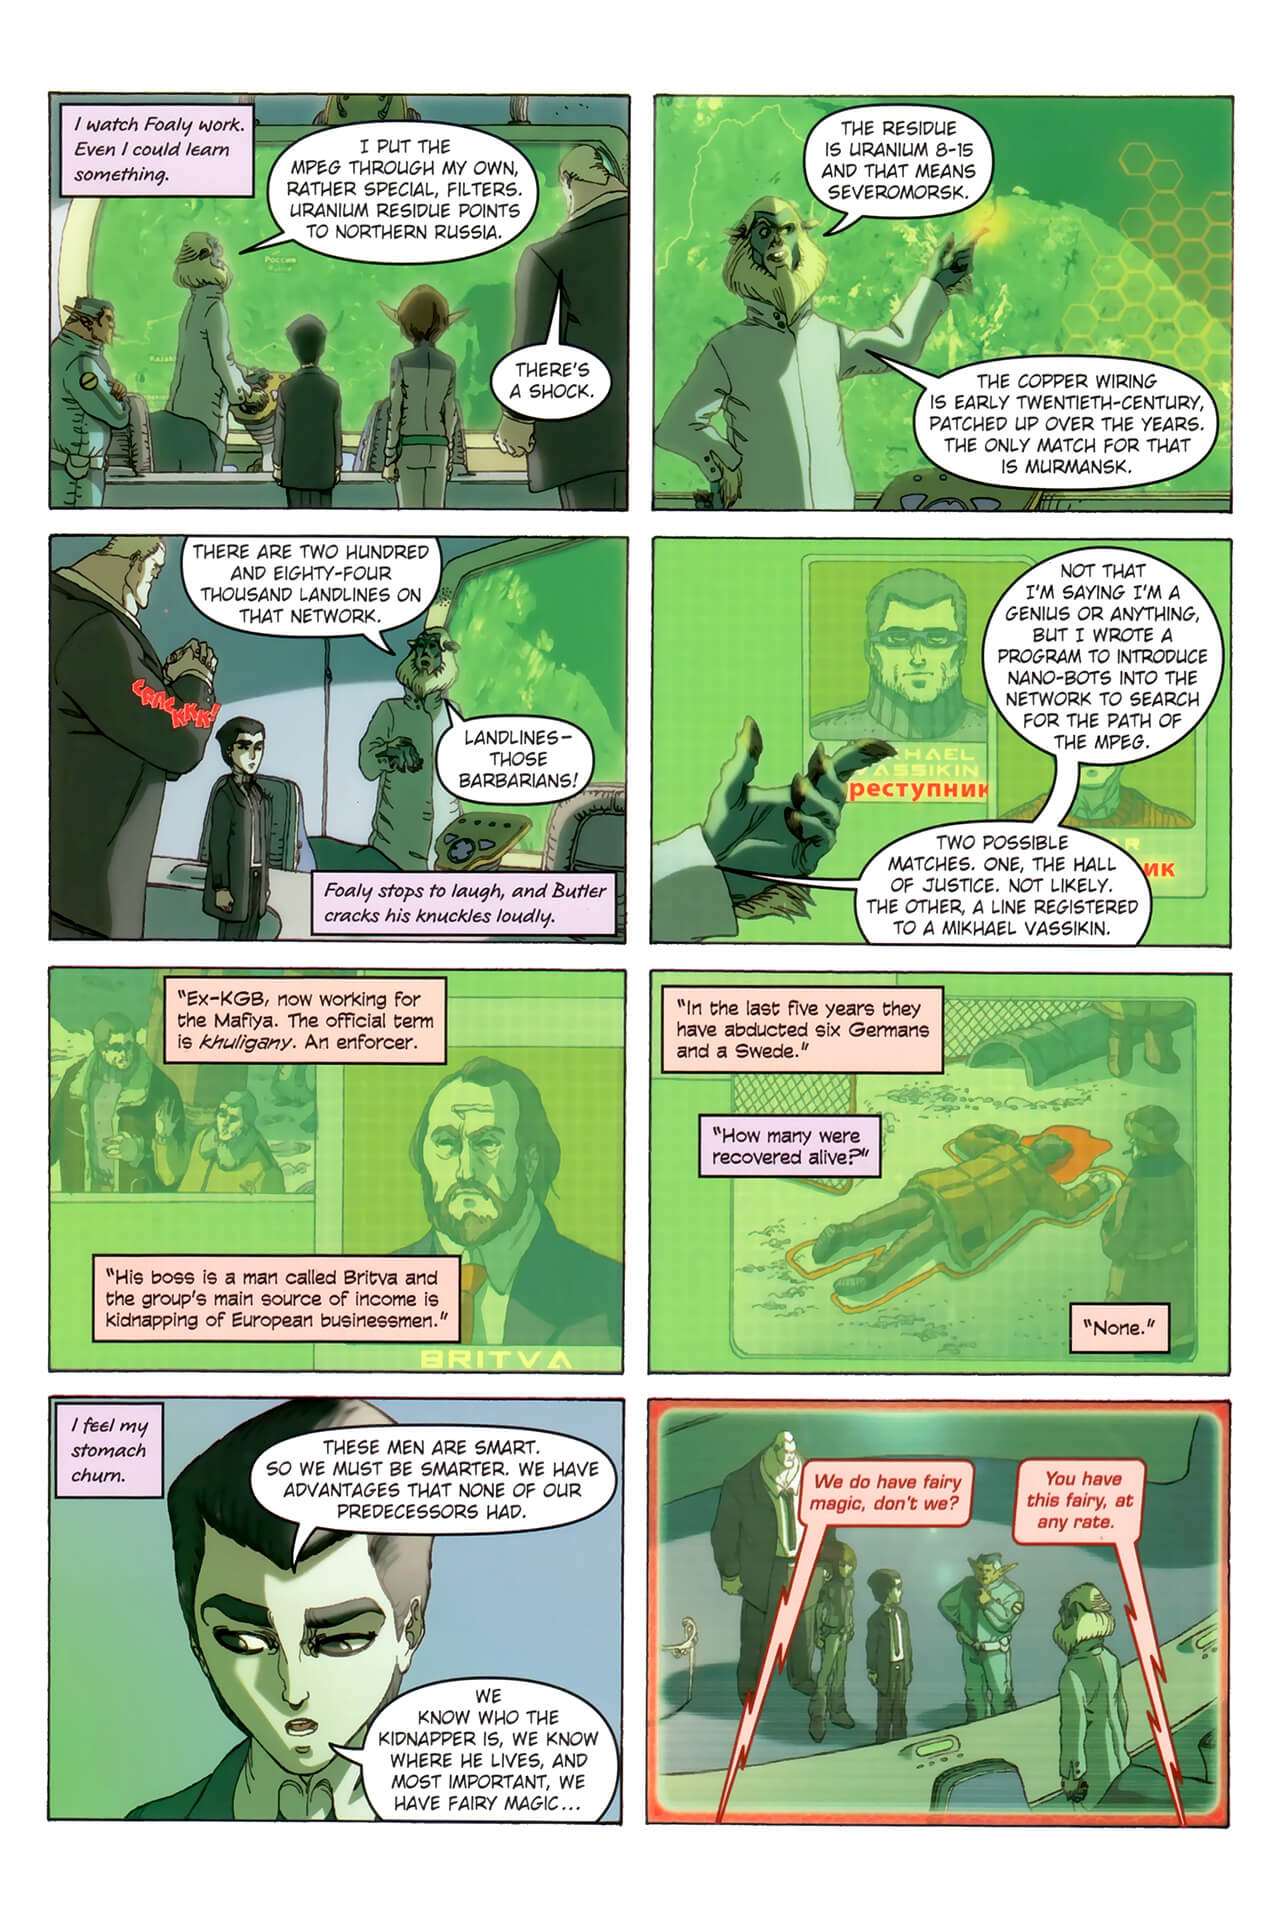 page 50 of artemis fowl the arctic incident graphic novel